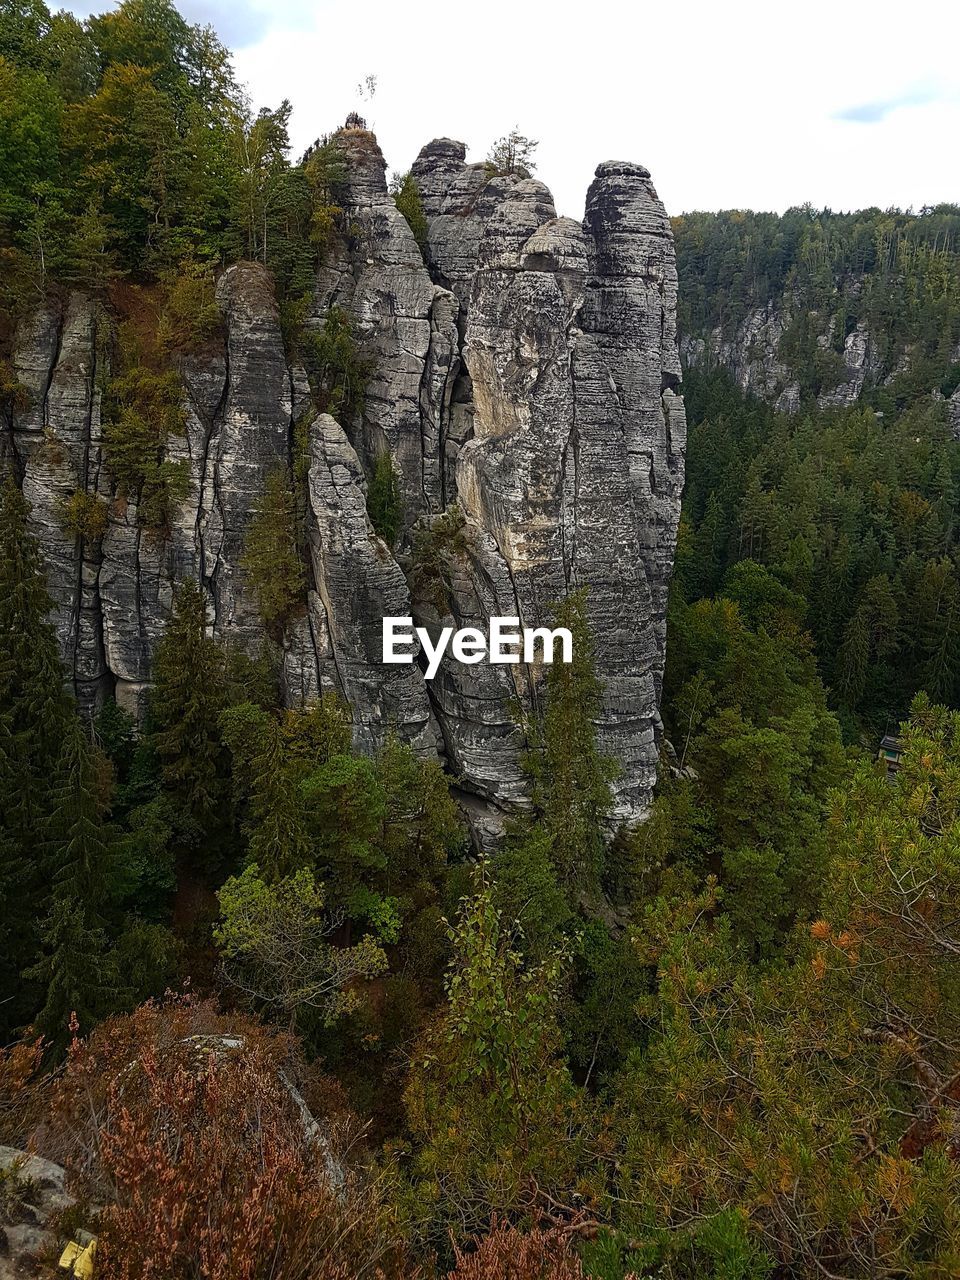 VIEW OF TREES ON ROCK FORMATION